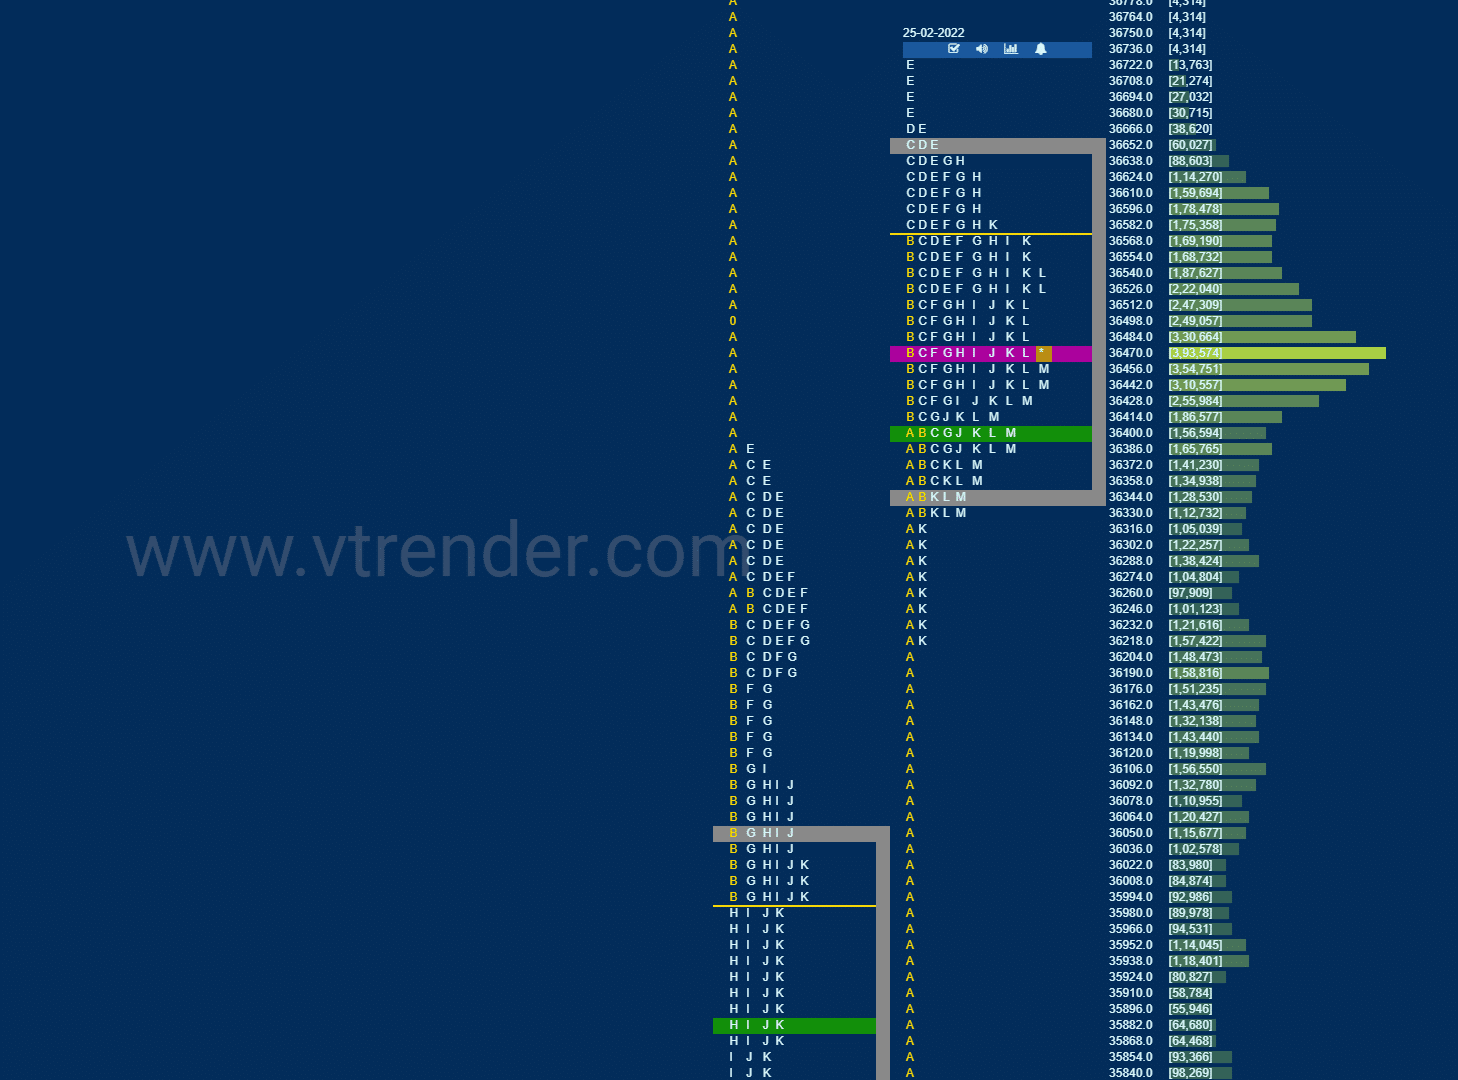 Bnf 18 Market Profile Analysis Dated 25Th February 2022 Banknifty Futures, Charts, Day Trading, Intraday Trading, Intraday Trading Strategies, Market Profile, Market Profile Trading Strategies, Nifty Futures, Order Flow Analysis, Support And Resistance, Technical Analysis, Trading Strategies, Volume Profile Trading